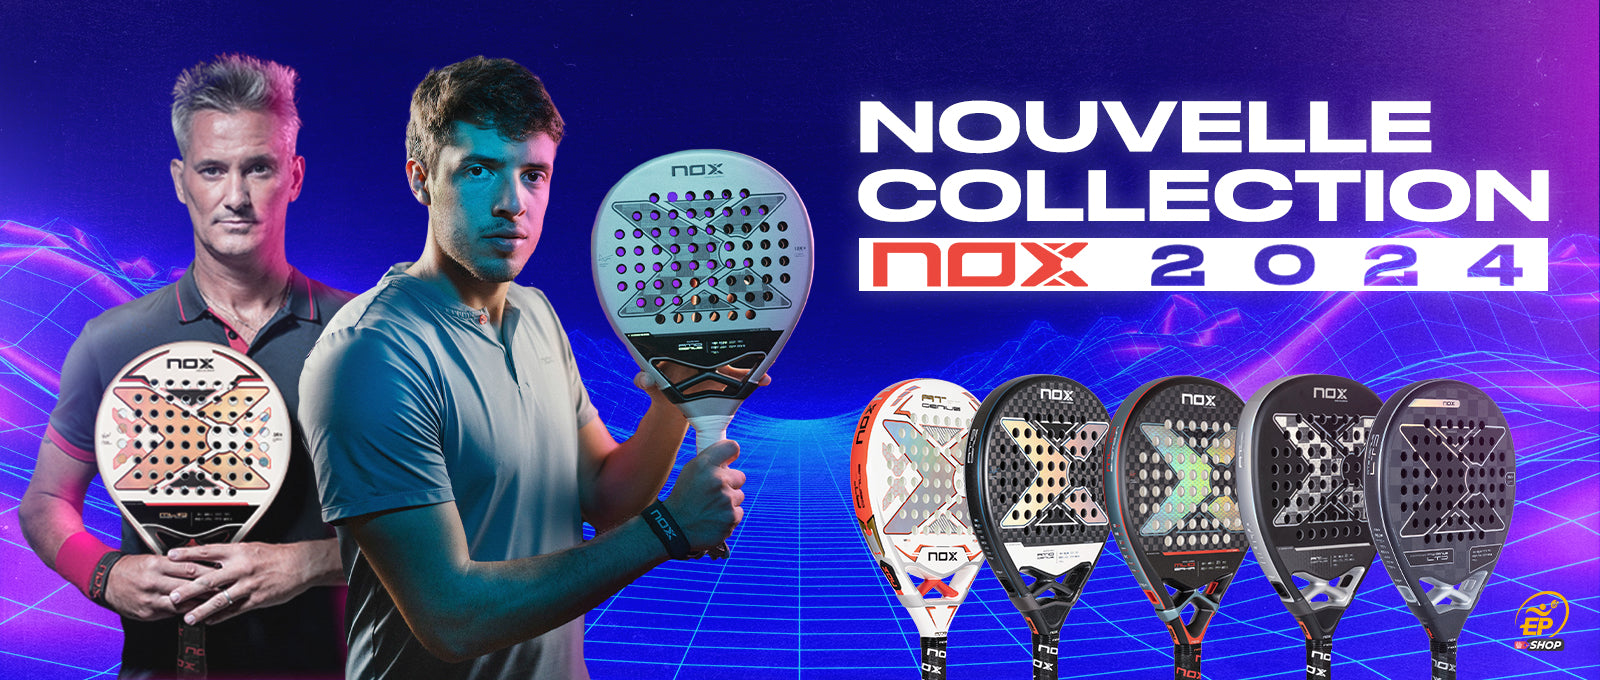 Padel accessoires, accessoires padel, padel accessoires outlet, padel  accessoires goedkoop- De Sport Outlet